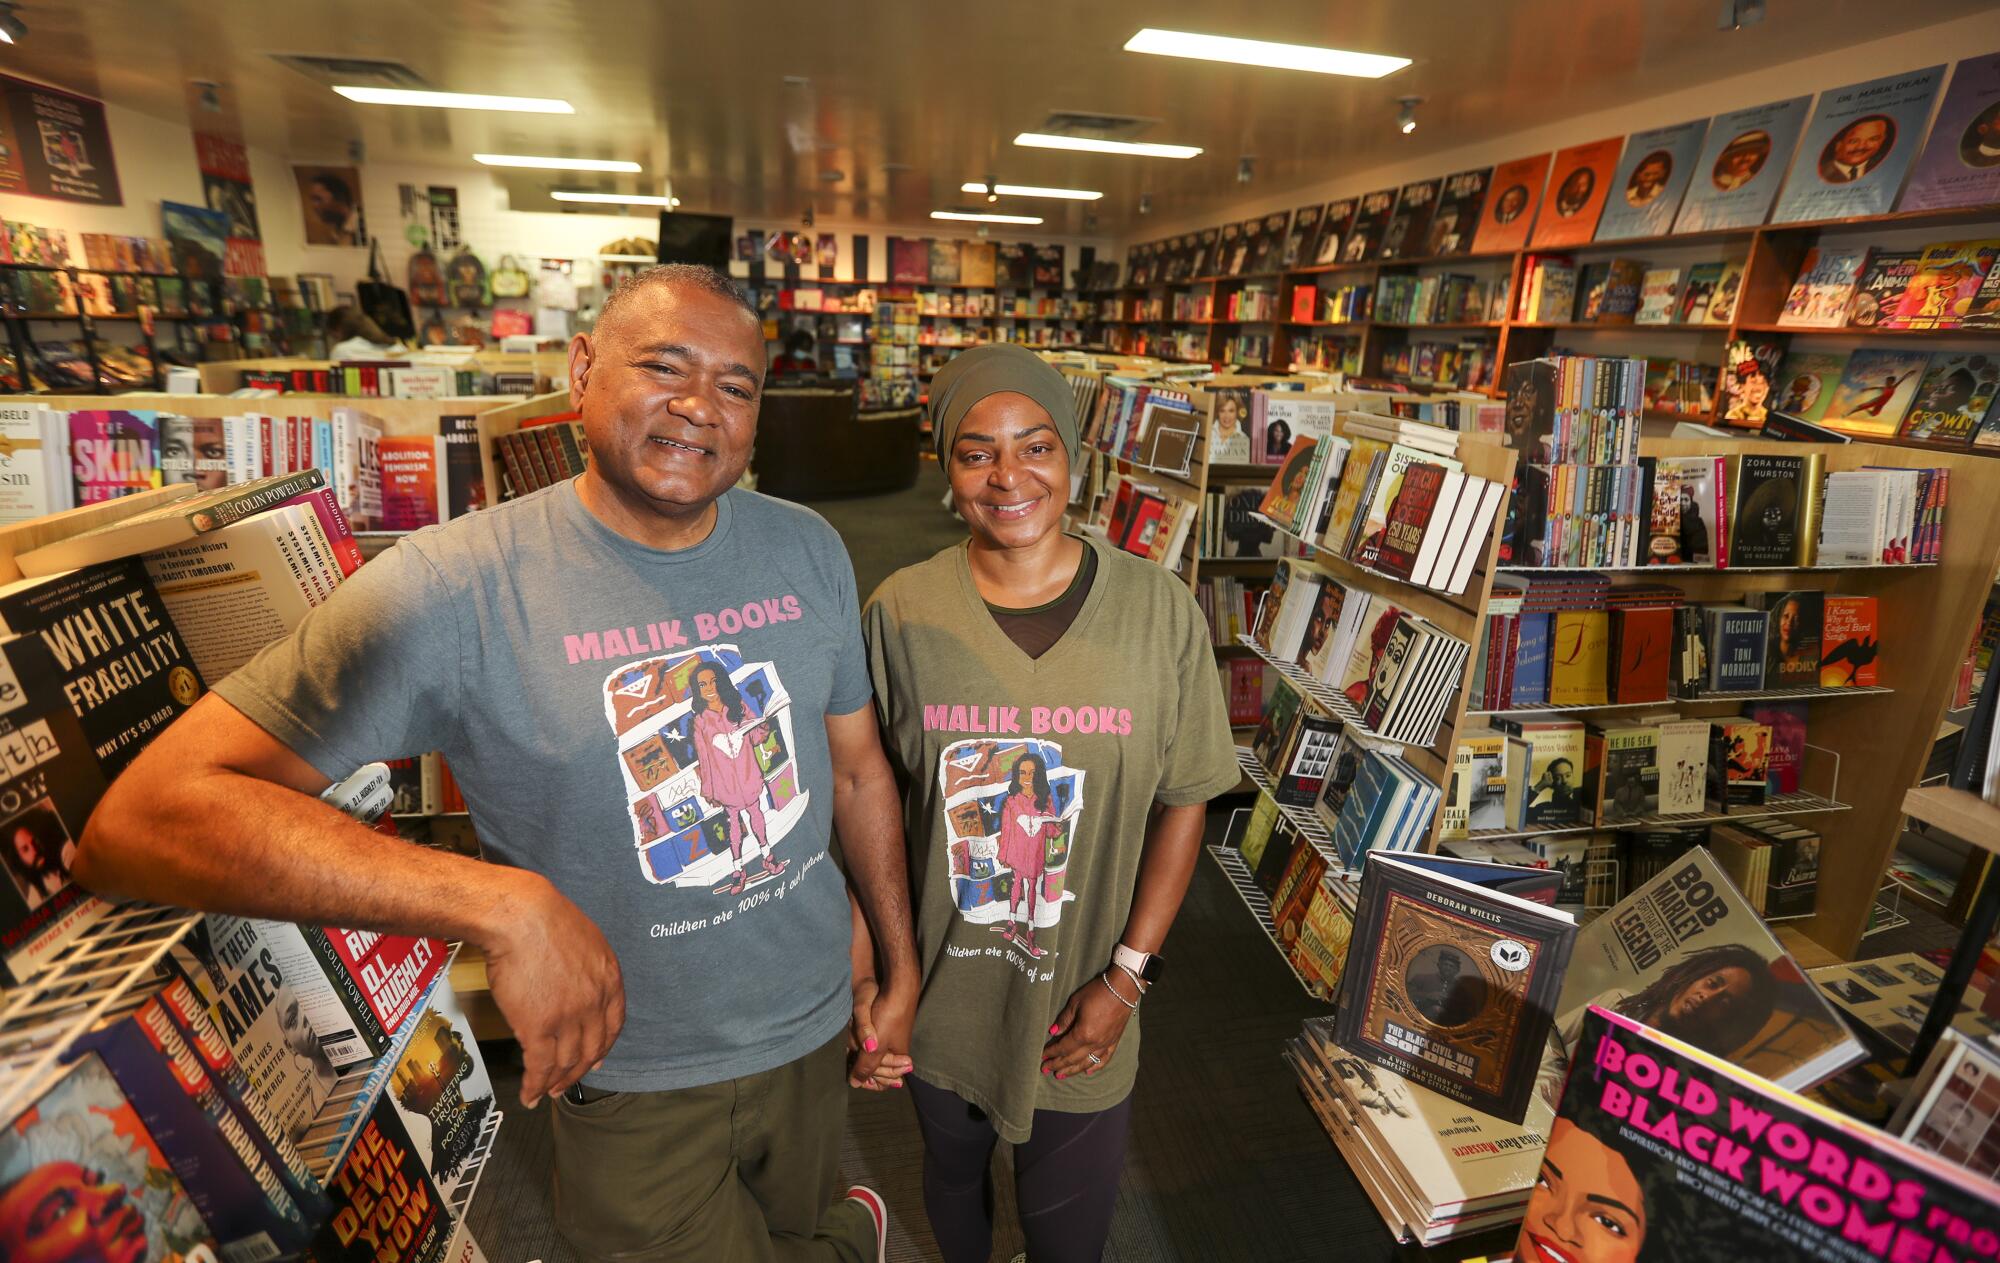 A man and a woman posing in "Malik Books" shirts in a bookstore.